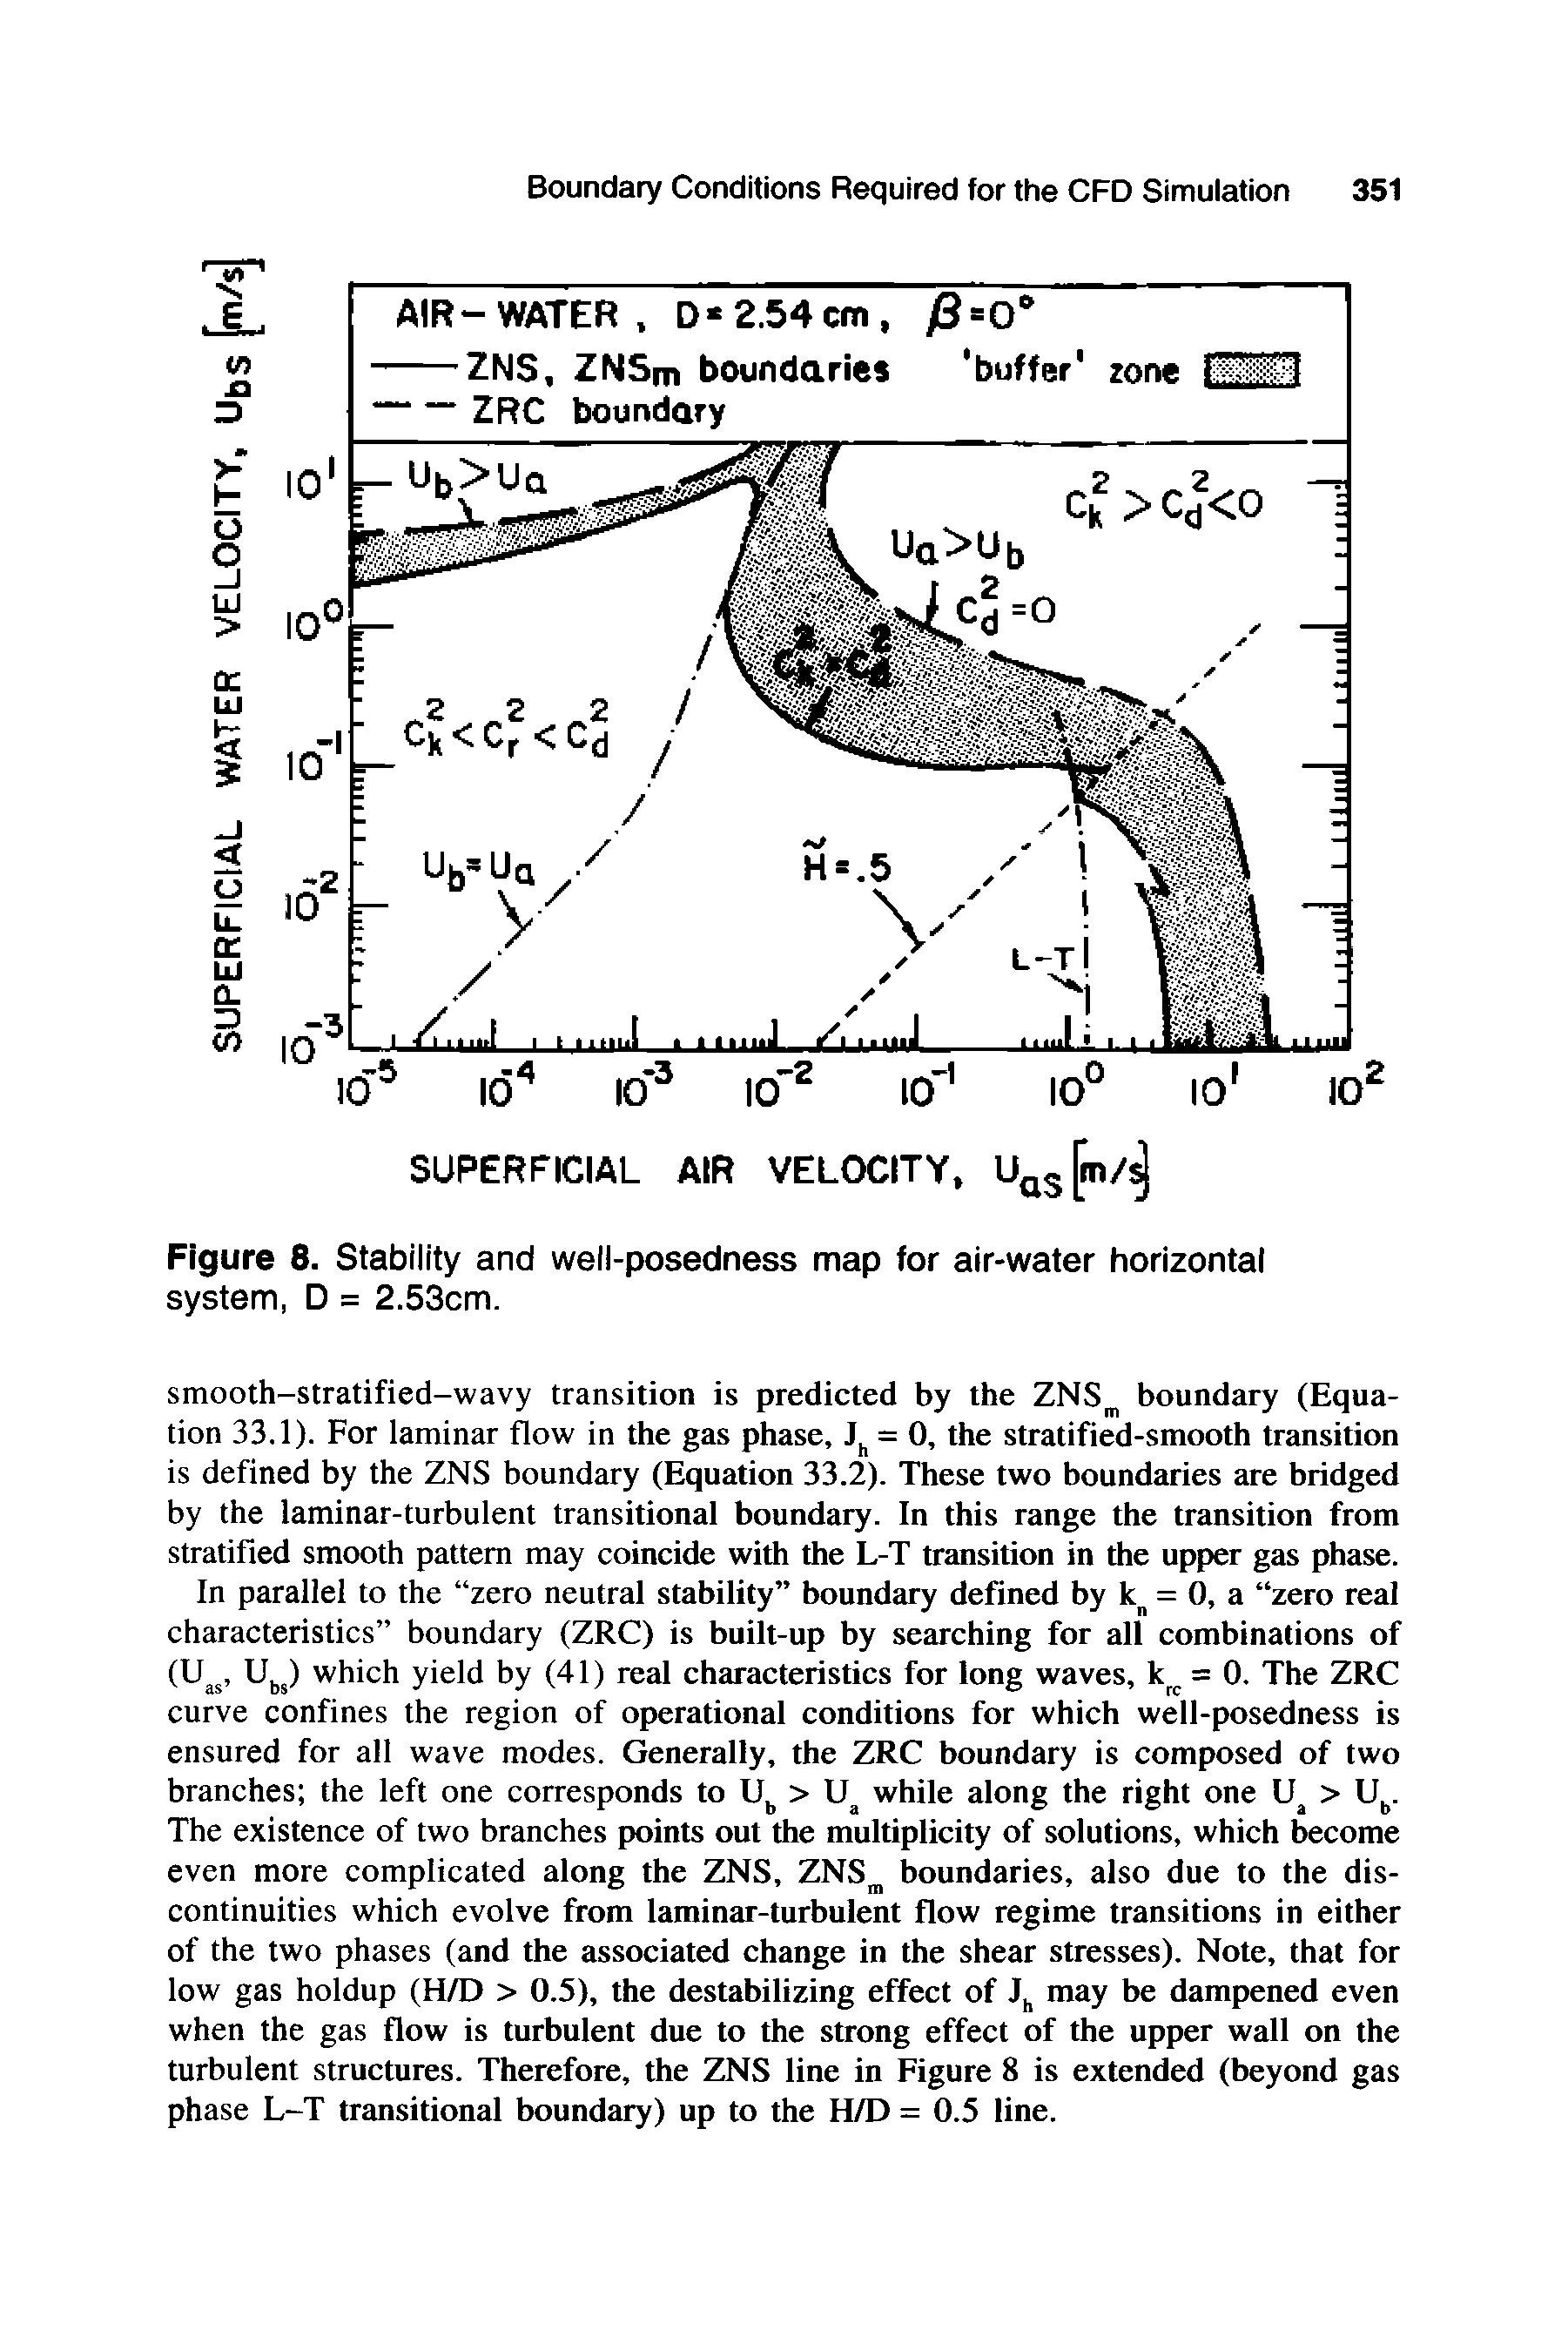 Figure 8. Stability and well-posedness map for air-water horizontal system, D = 2.53cm.